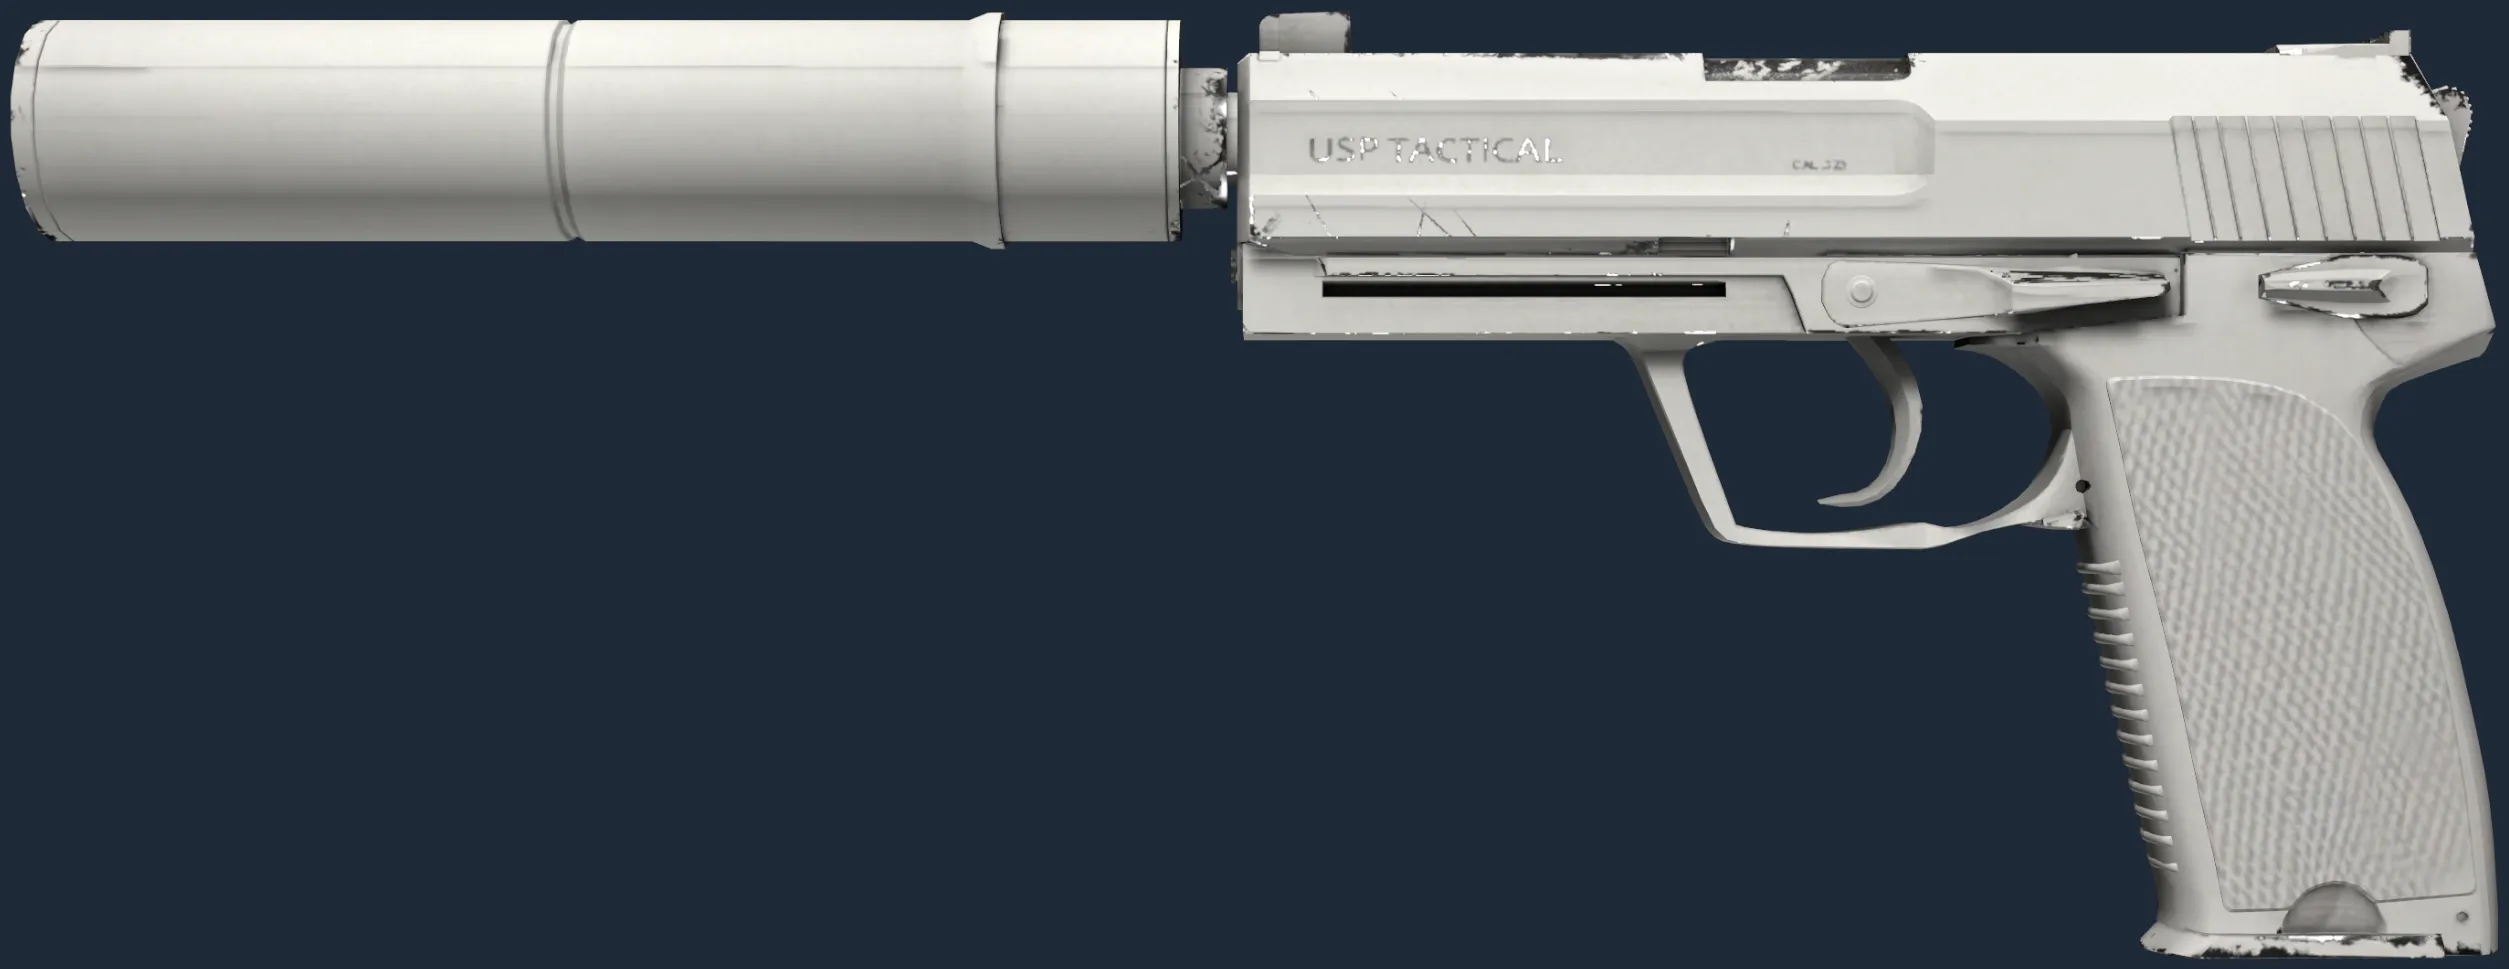 USP-S | Whiteout (Factory New)